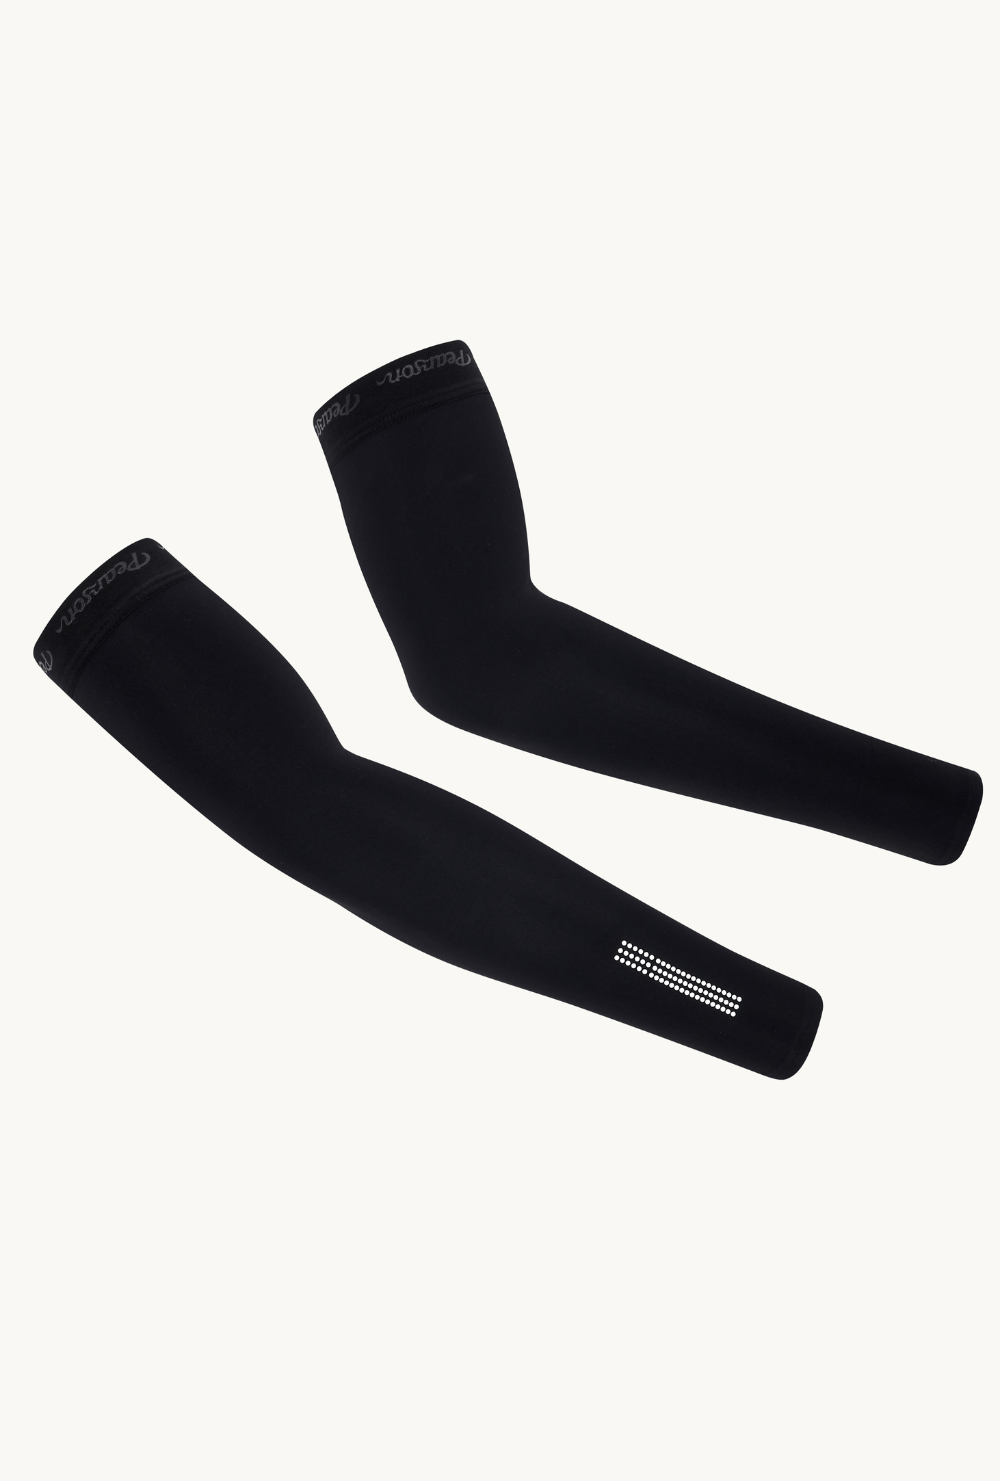 Pearson Cycles Pearson 1860, Call To Arms - Thermal Arm Warmers, Small / Black